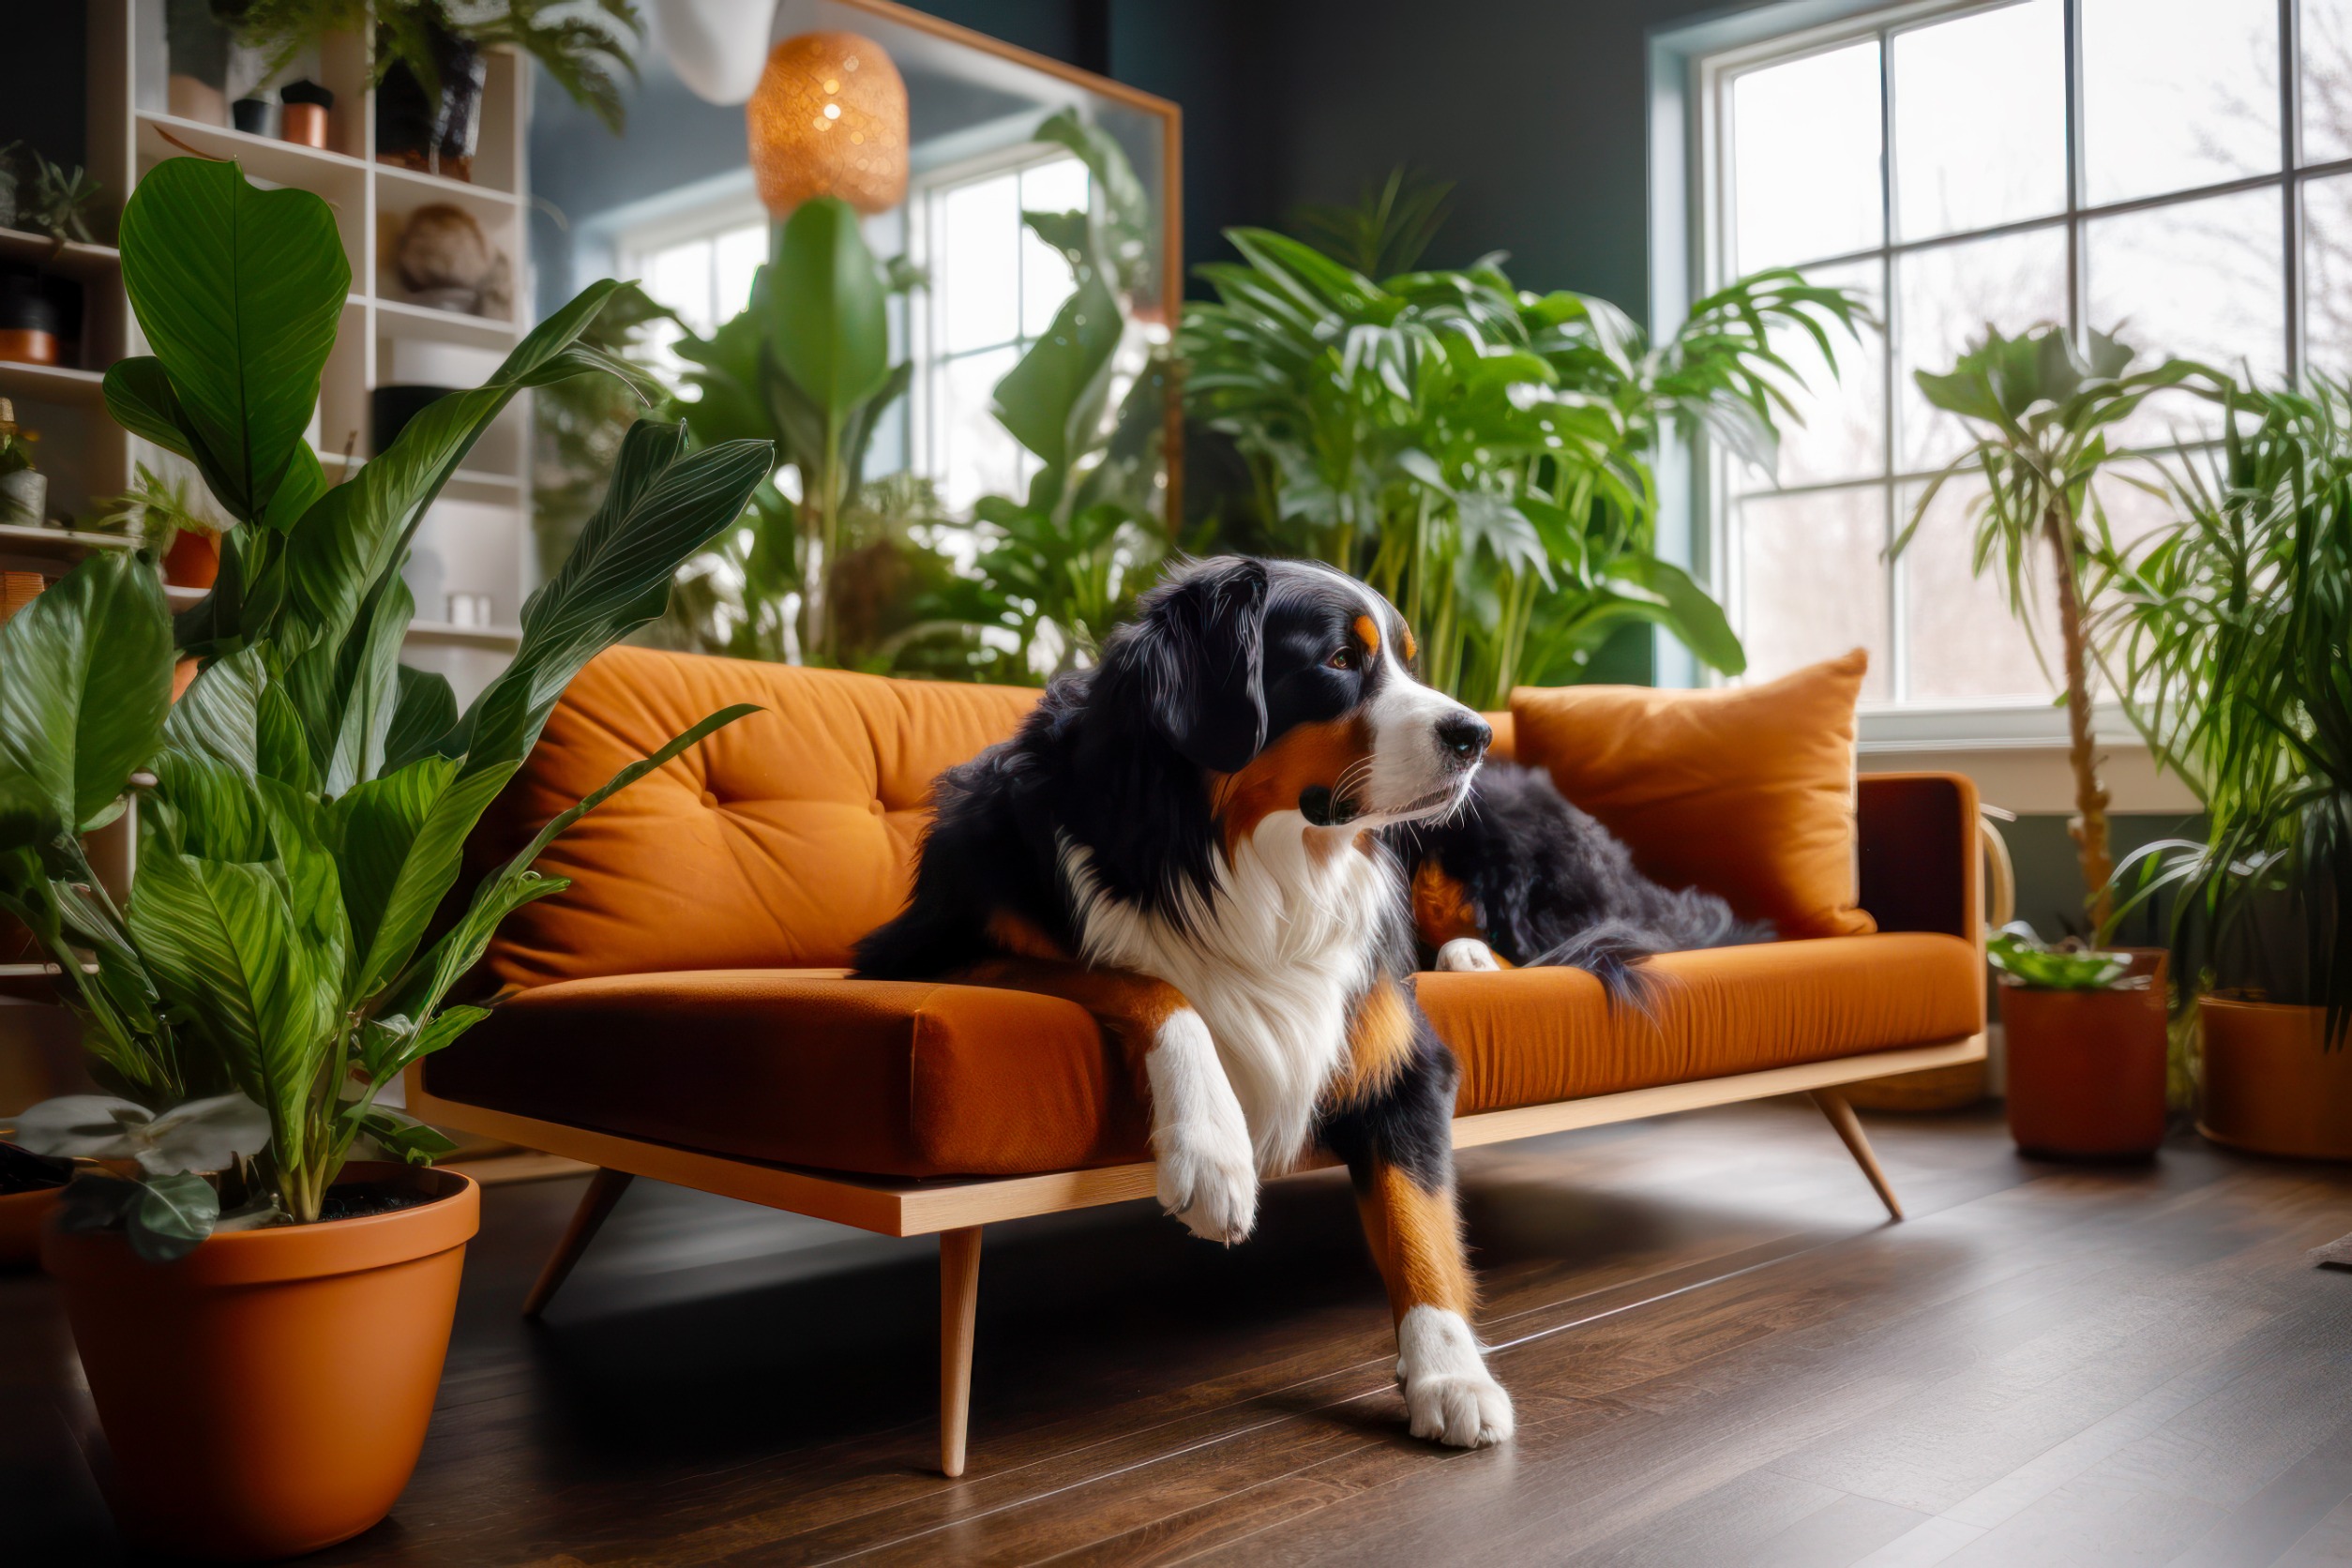 Dog and pet-friendly plants